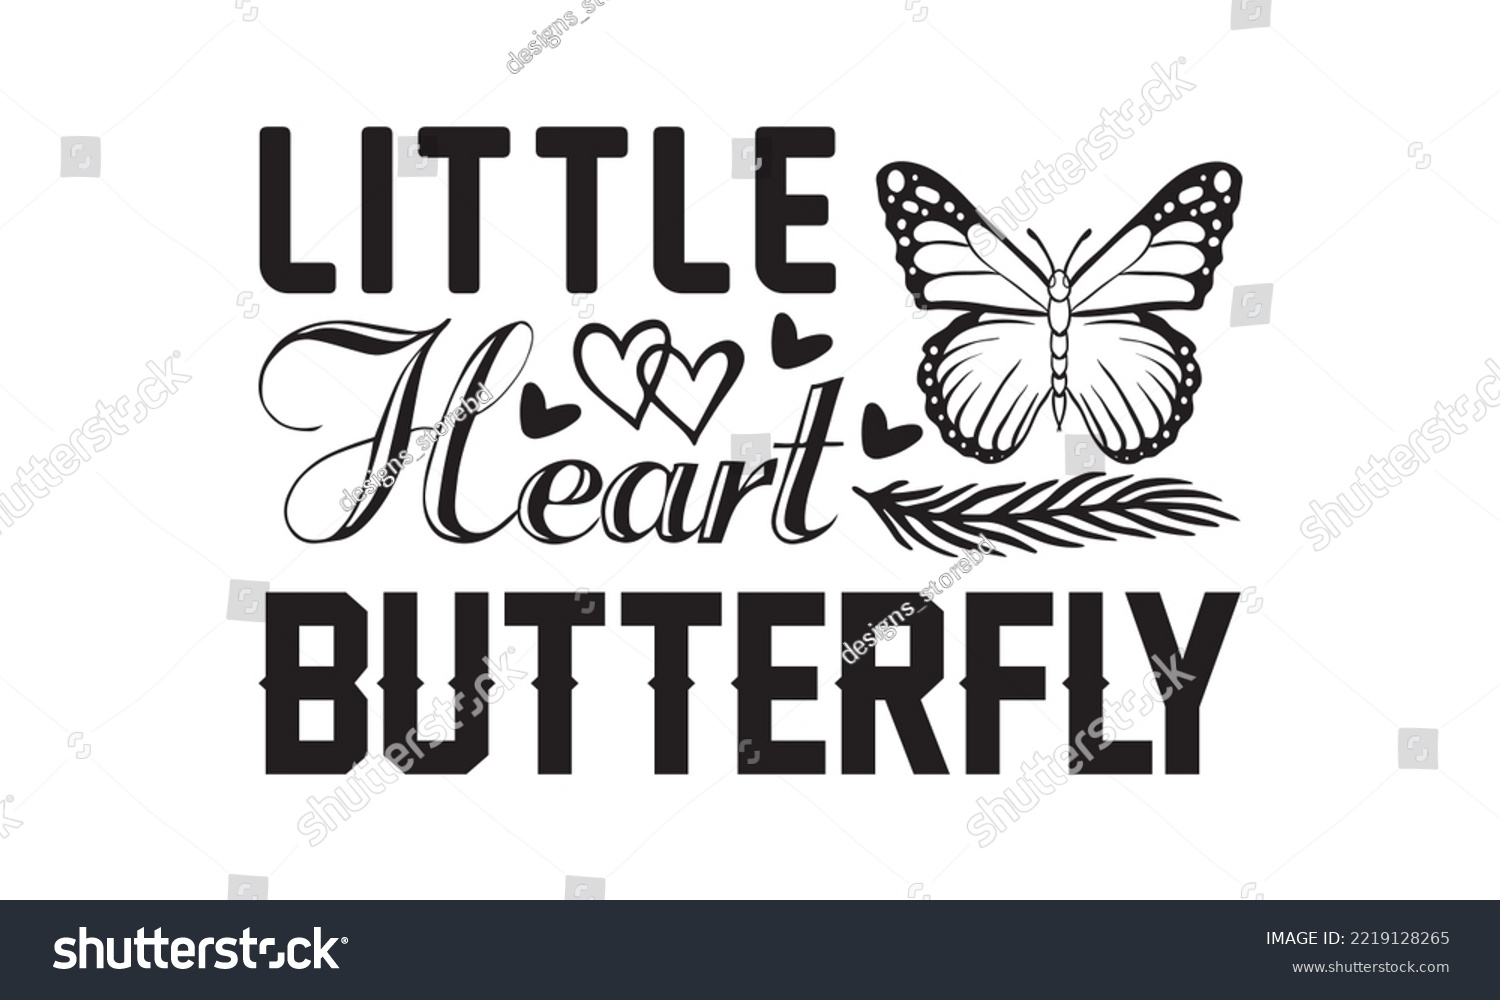 SVG of Little Heart Butterfly Svg, Butterfly svg, Butterfly svg t-shirt design, butterflies and daisies positive quote flower watercolor margarita mariposa stationery, mug, t shirt, svg, eps 10 svg